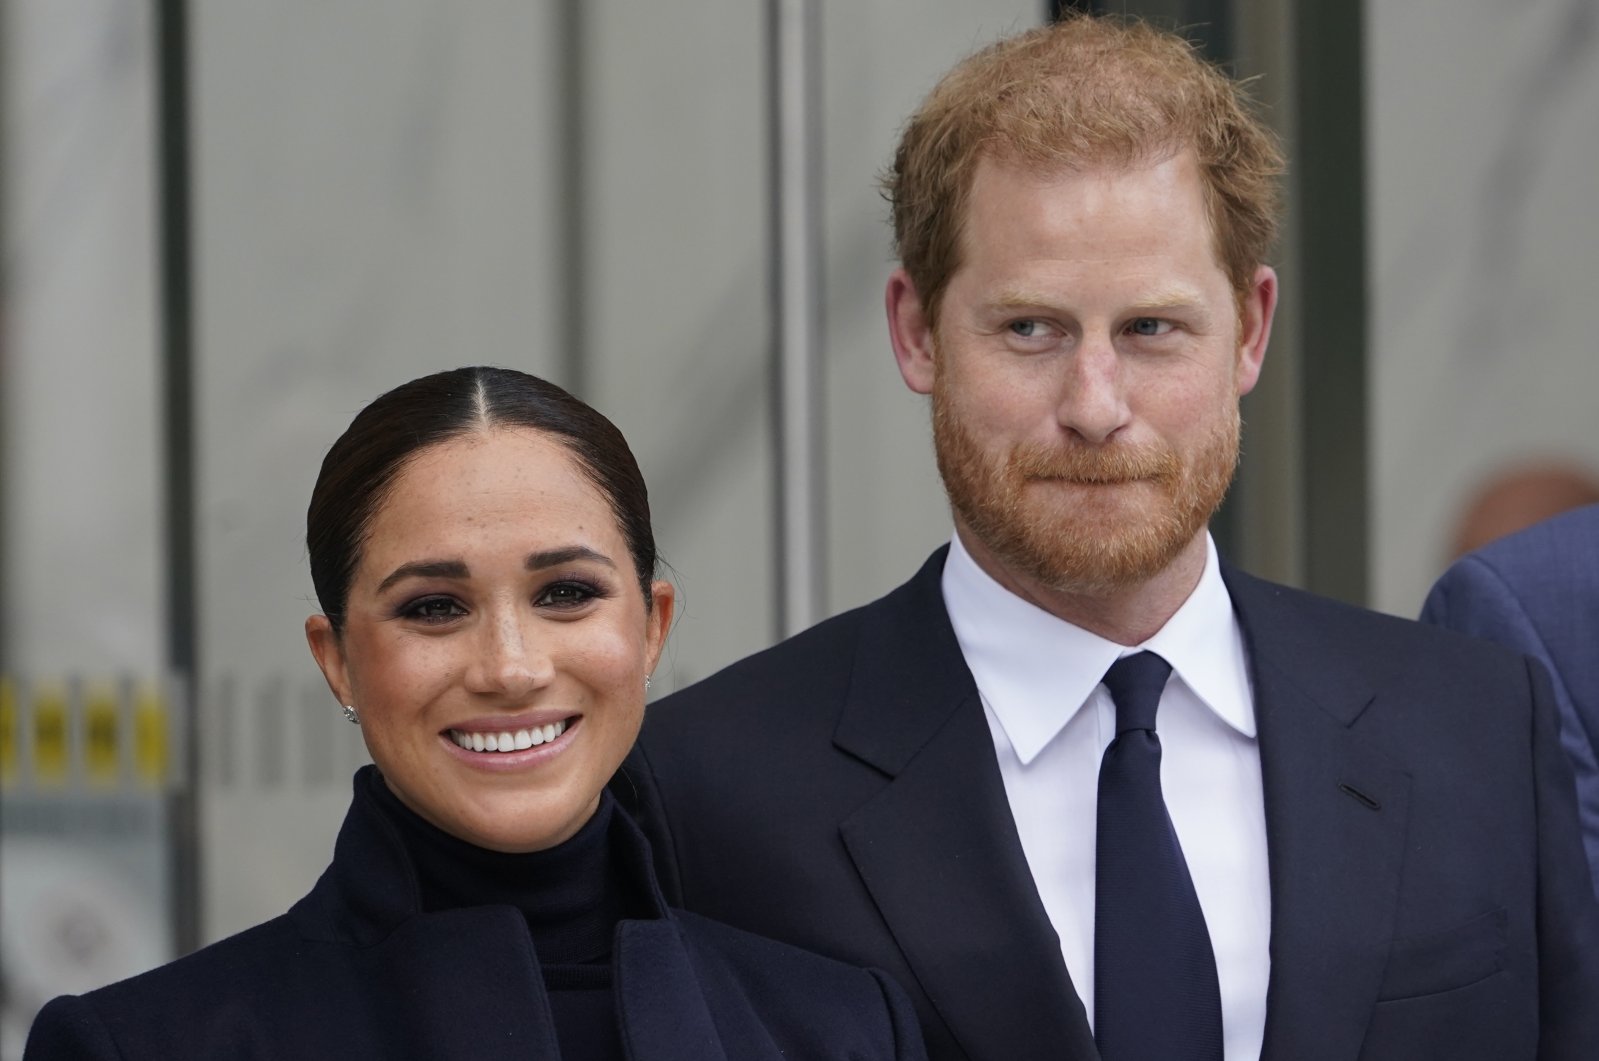 Meghan Markle and Prince Harry pose for pictures after visiting the observatory in One World Trade in New York, U.S., Sept. 23, 2021. (AP Photo)